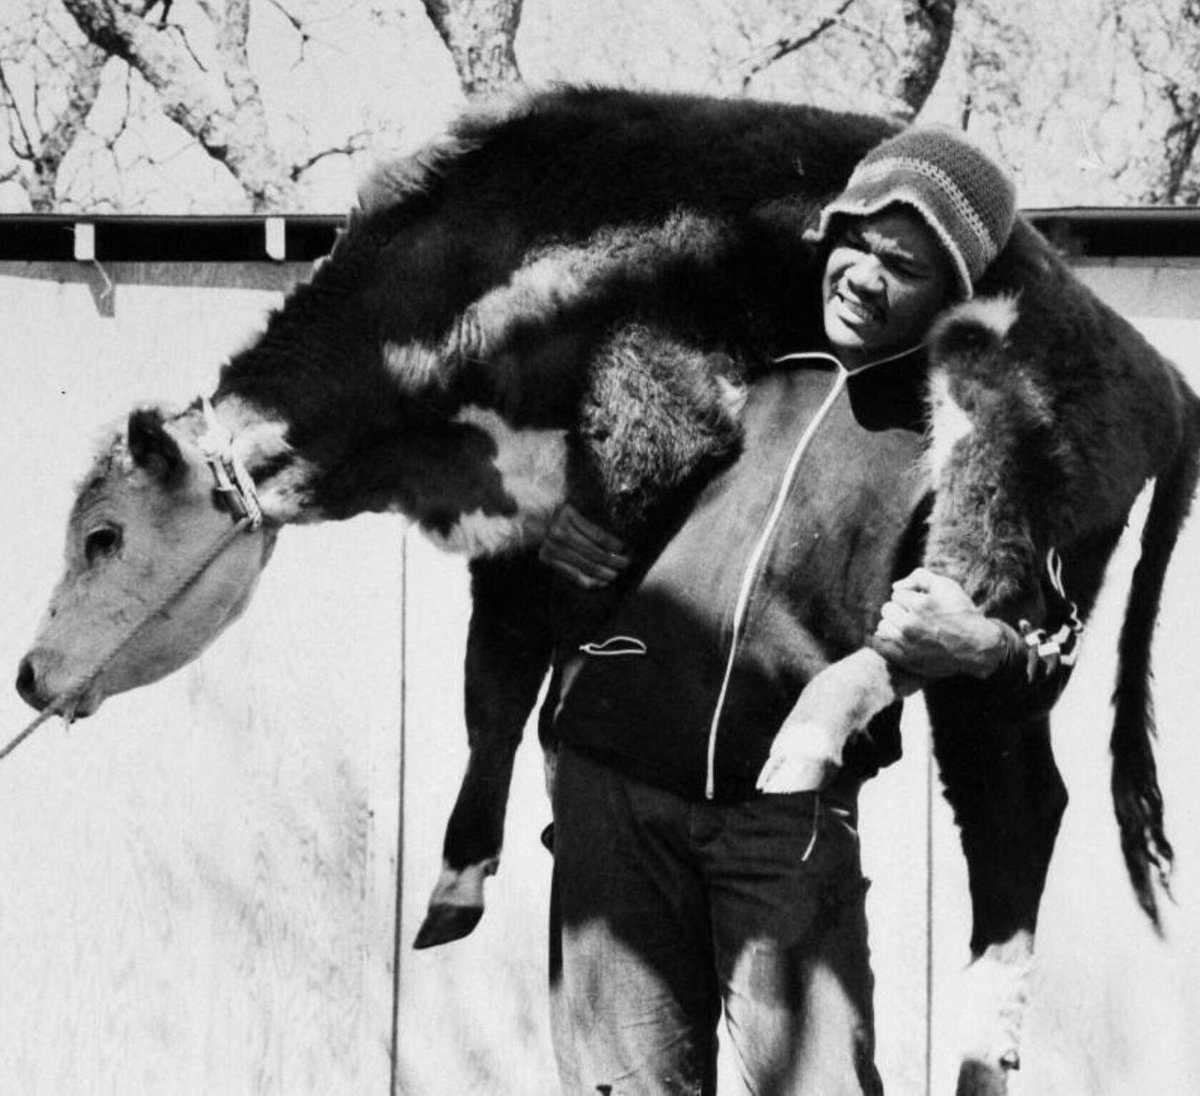 Future Heavyweight Champion, George Foreman. Some old school strength training on his farm before there were weight rooms. His other training favorites were pushing cars, and chopping cords of wood and chopping down trees, by hand.